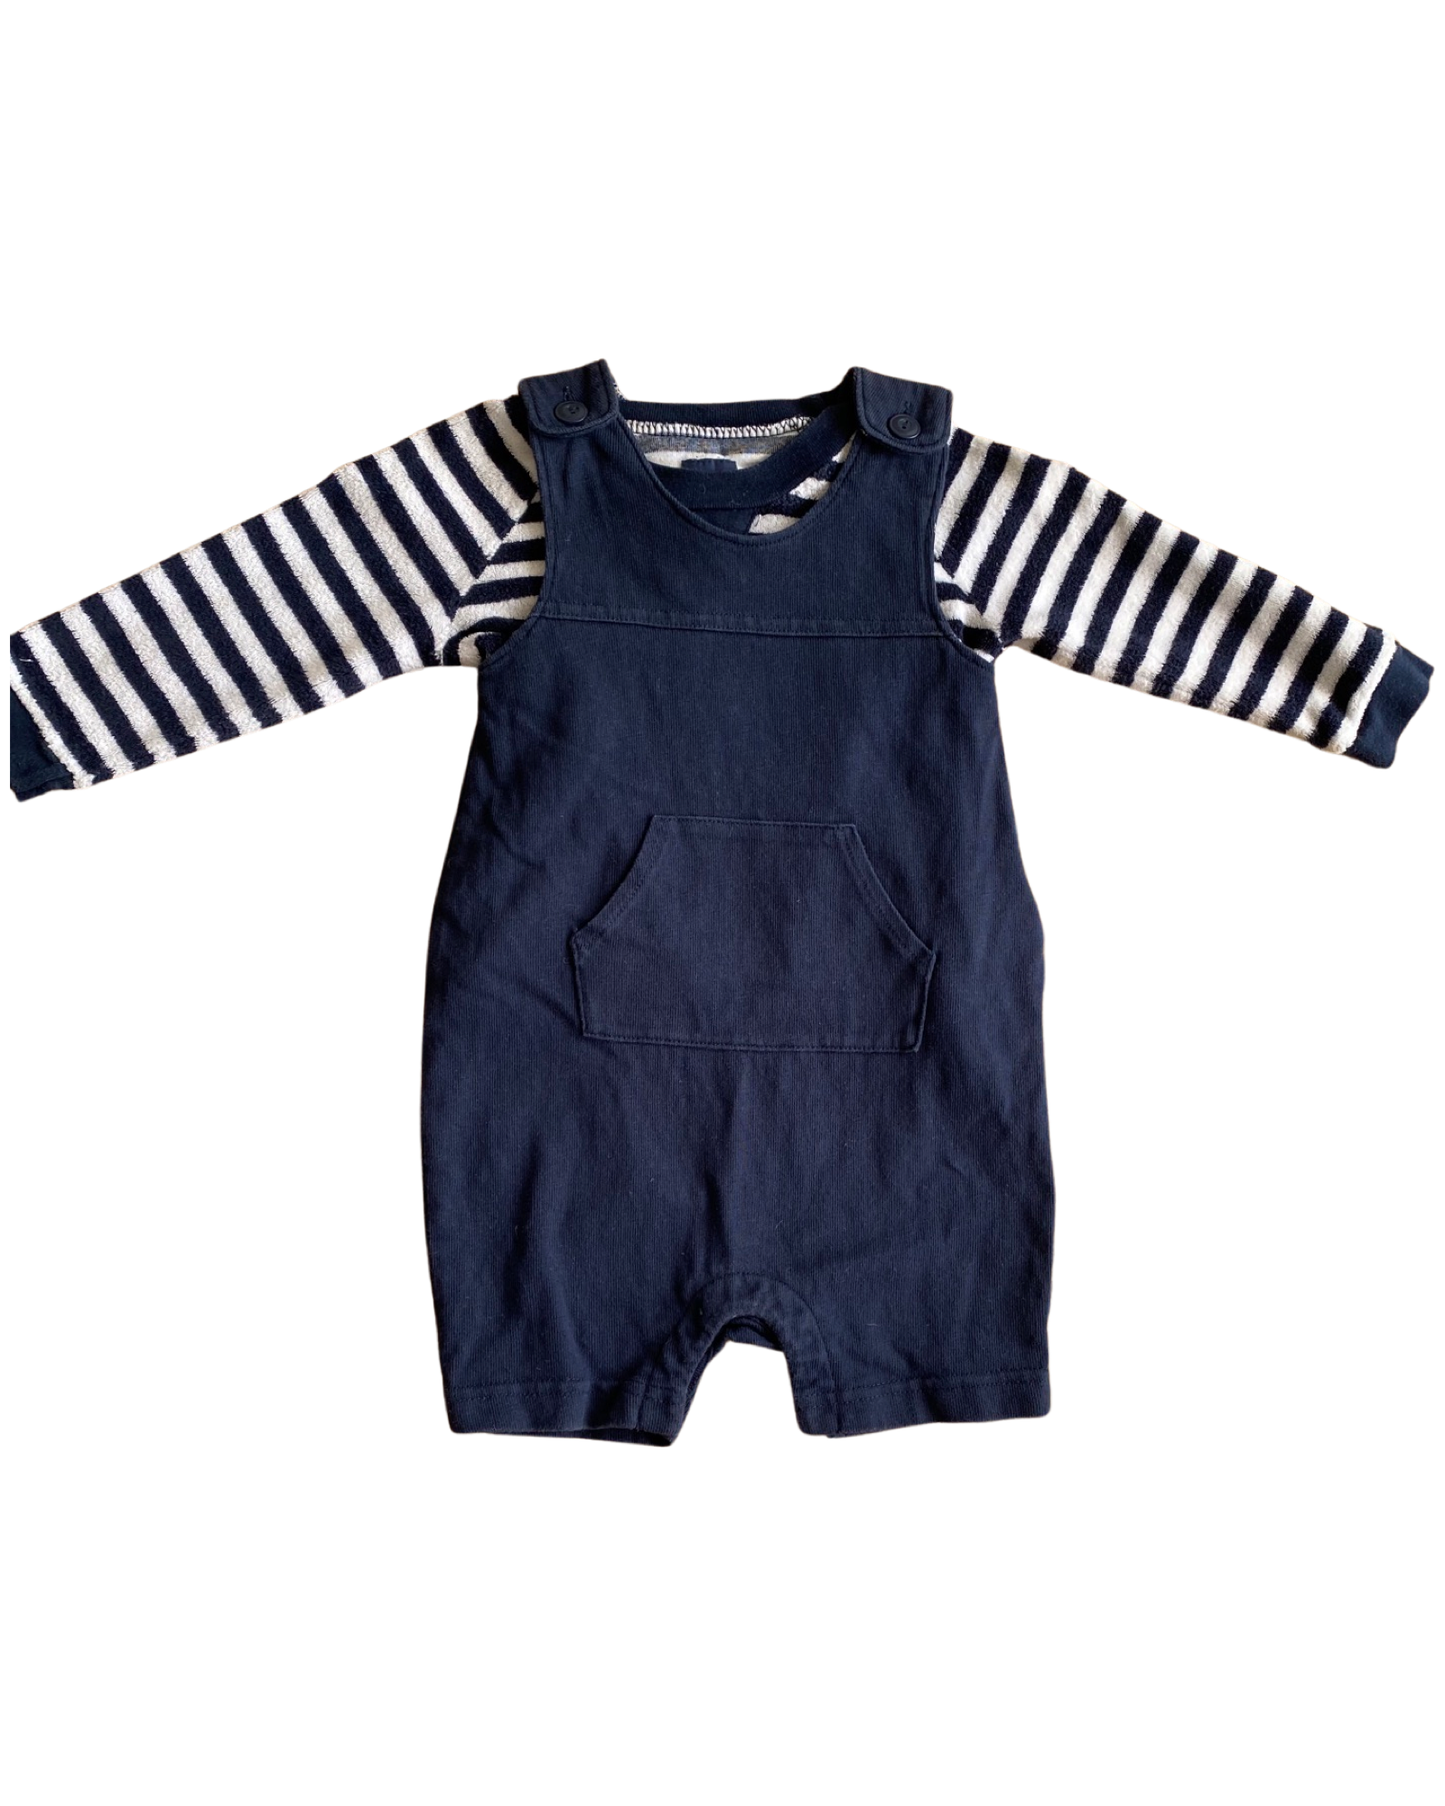 Baby Gap navy short jersey romper with striped terry towelling long sleeve top (12 -18mths)